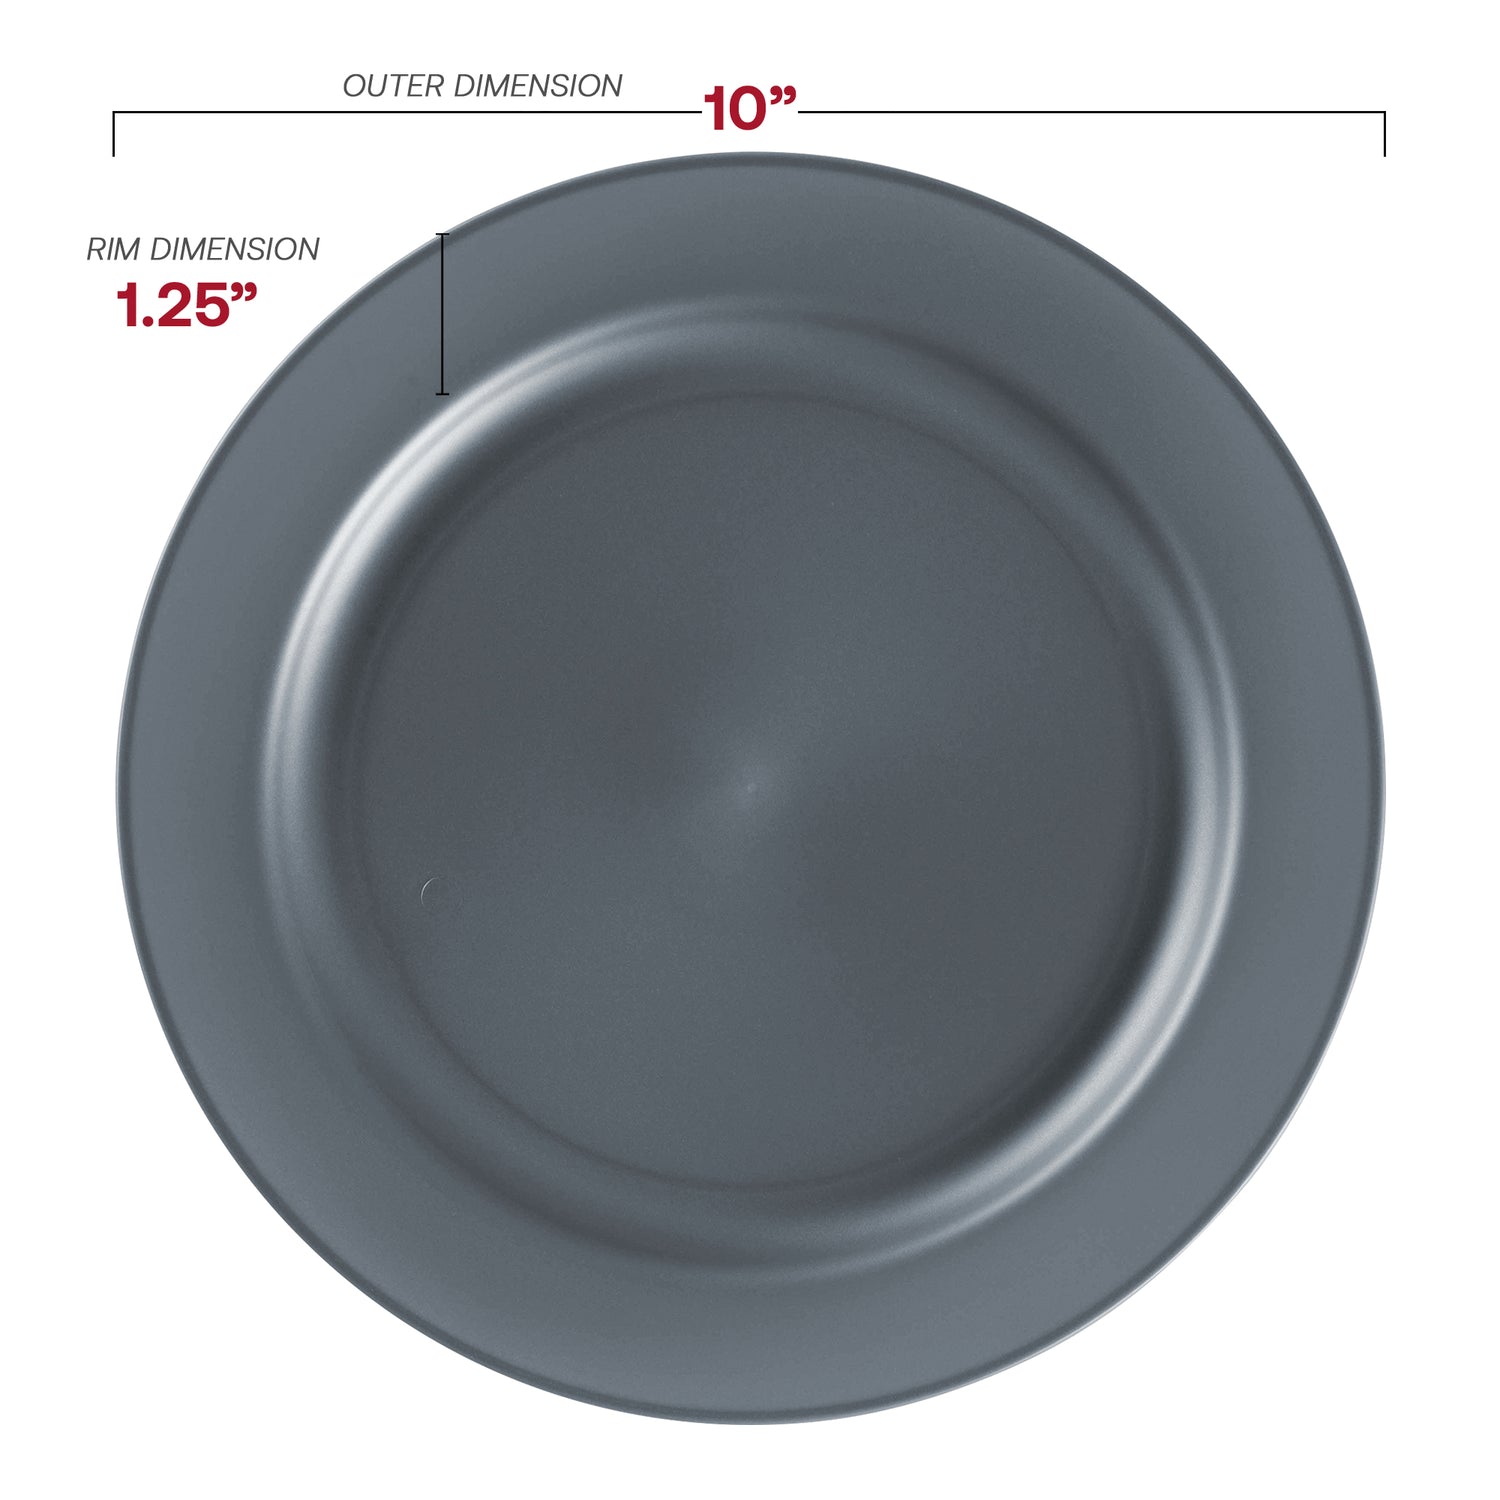 Matte Charcoal Gray Round Plastic Dinner Plates (10") Dimension | The Kaya Collection